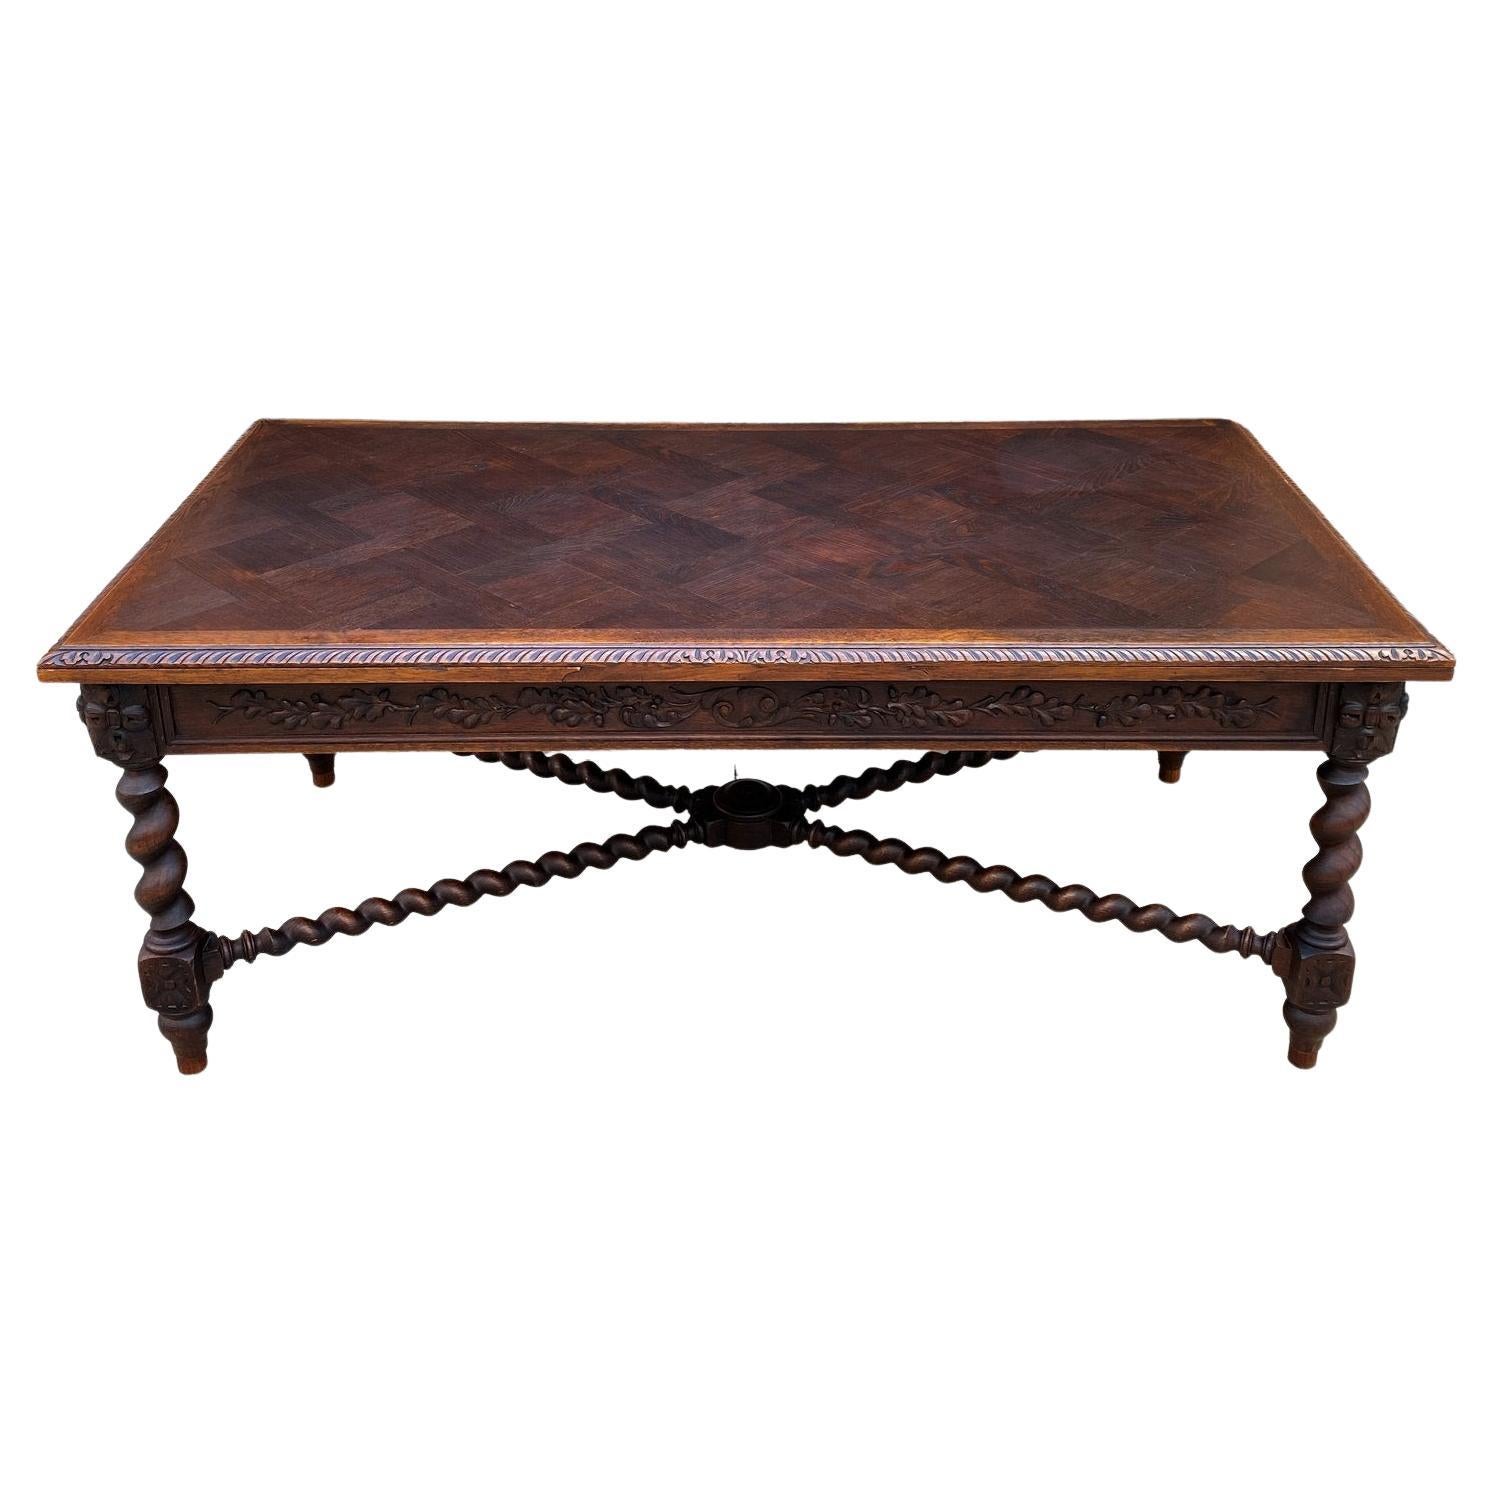 Antique French Dining Table Draw Leaf Desk Library Conference Table Barley Twist